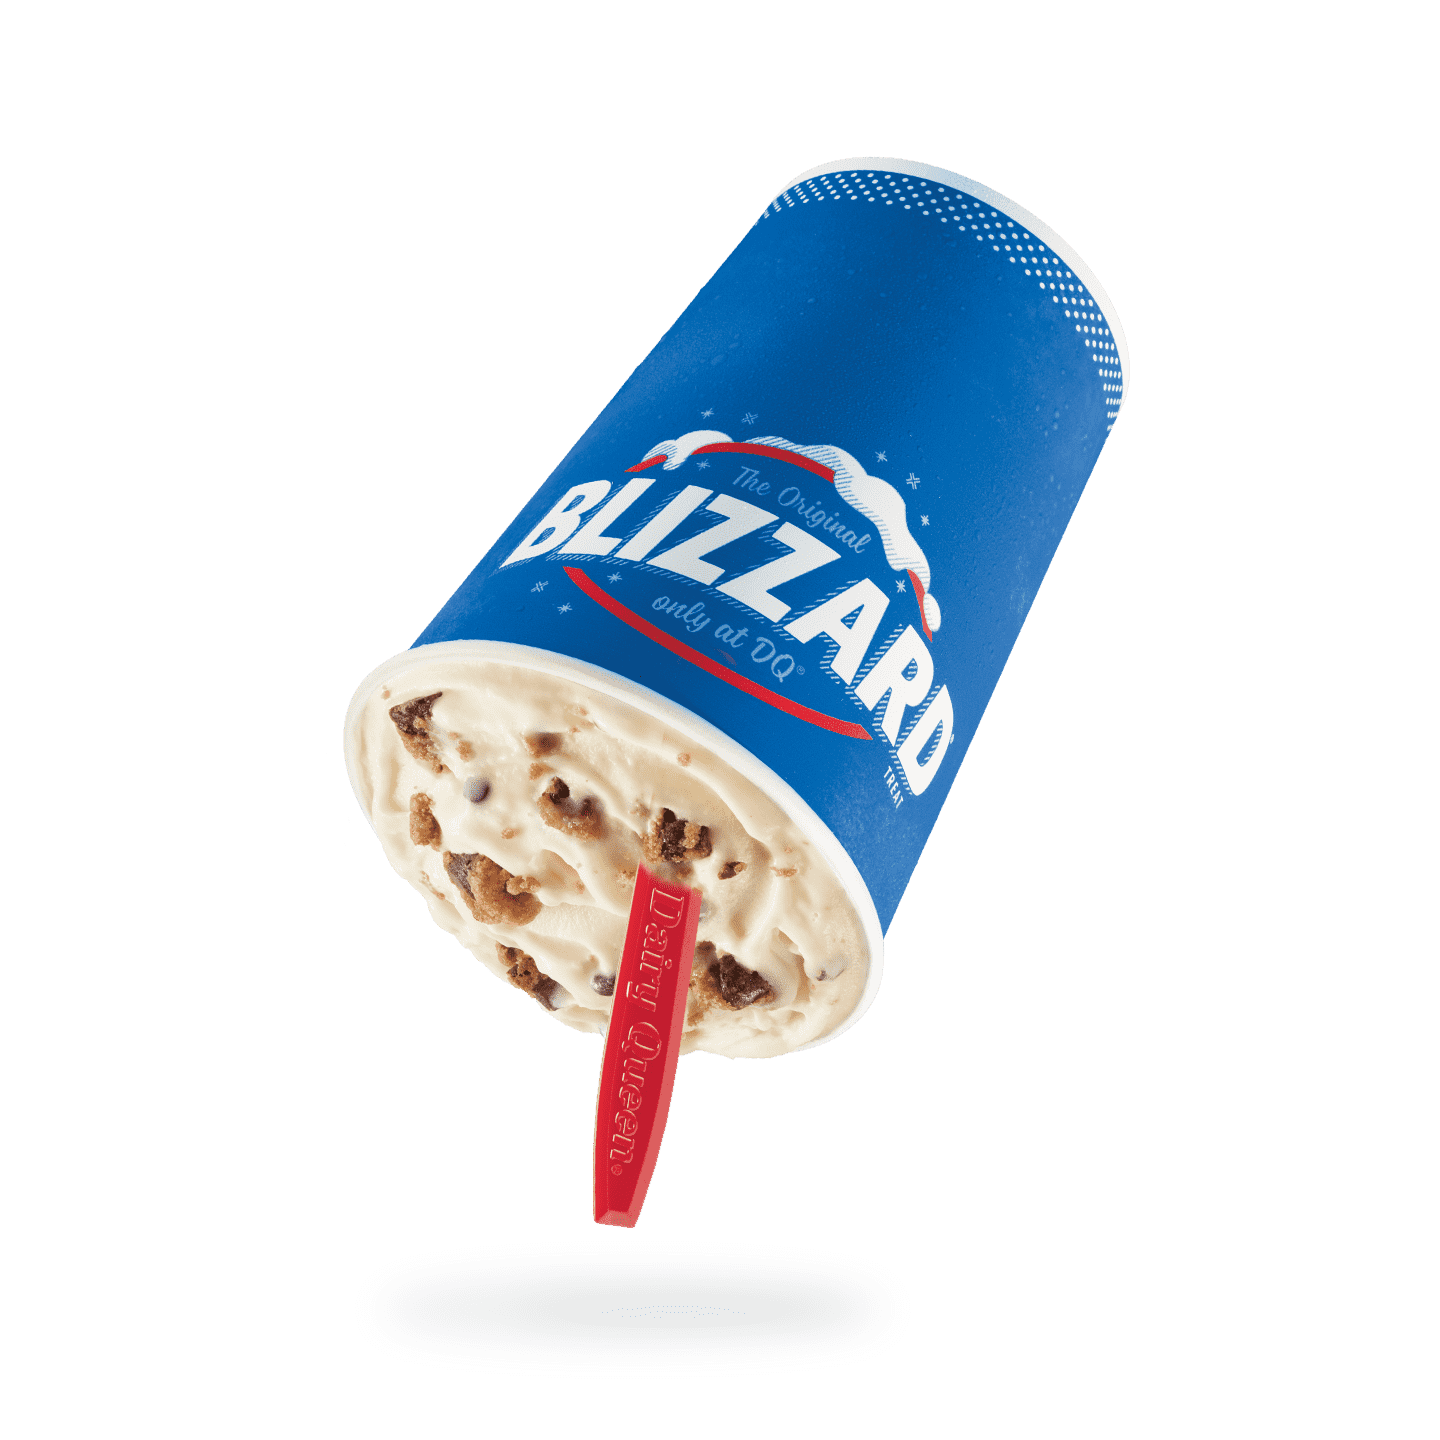 Dairy Queen Small Nestle Toll House Chocolate Chip Cookie Blizzard Nutrition Facts